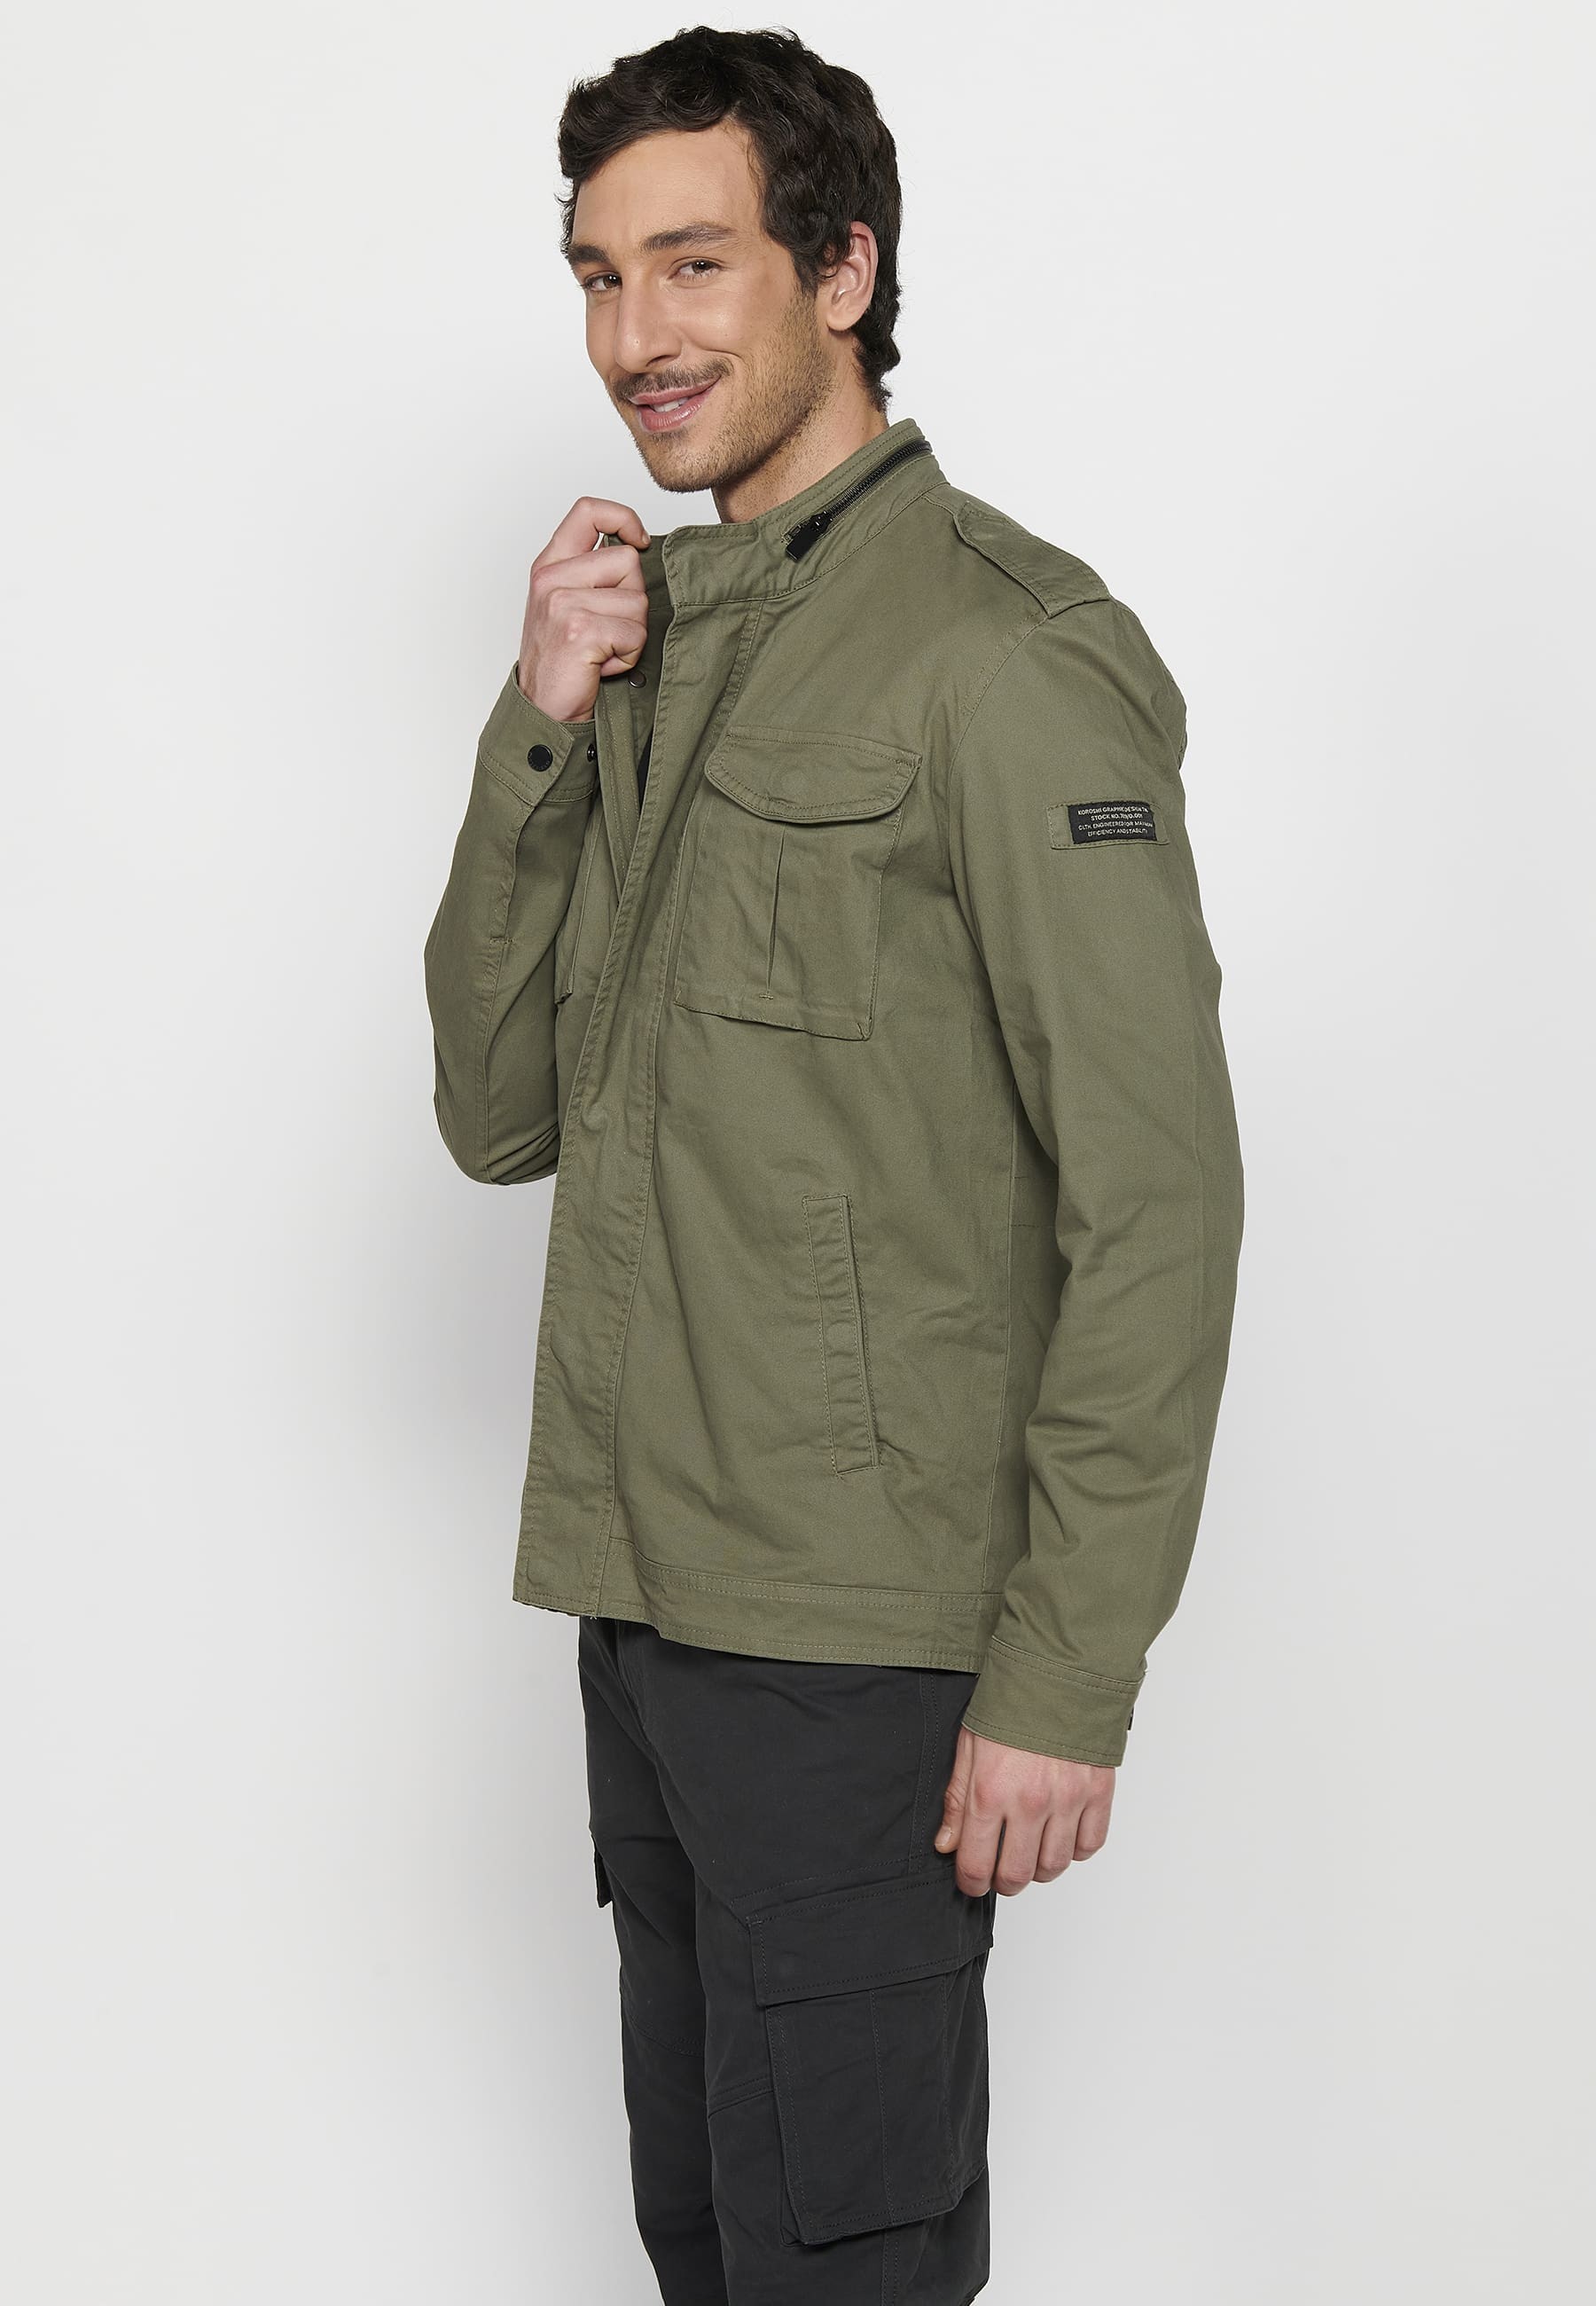 Long Sleeve Jacket with High Neck and Front Zipper Closure with Green Pockets for Men 9